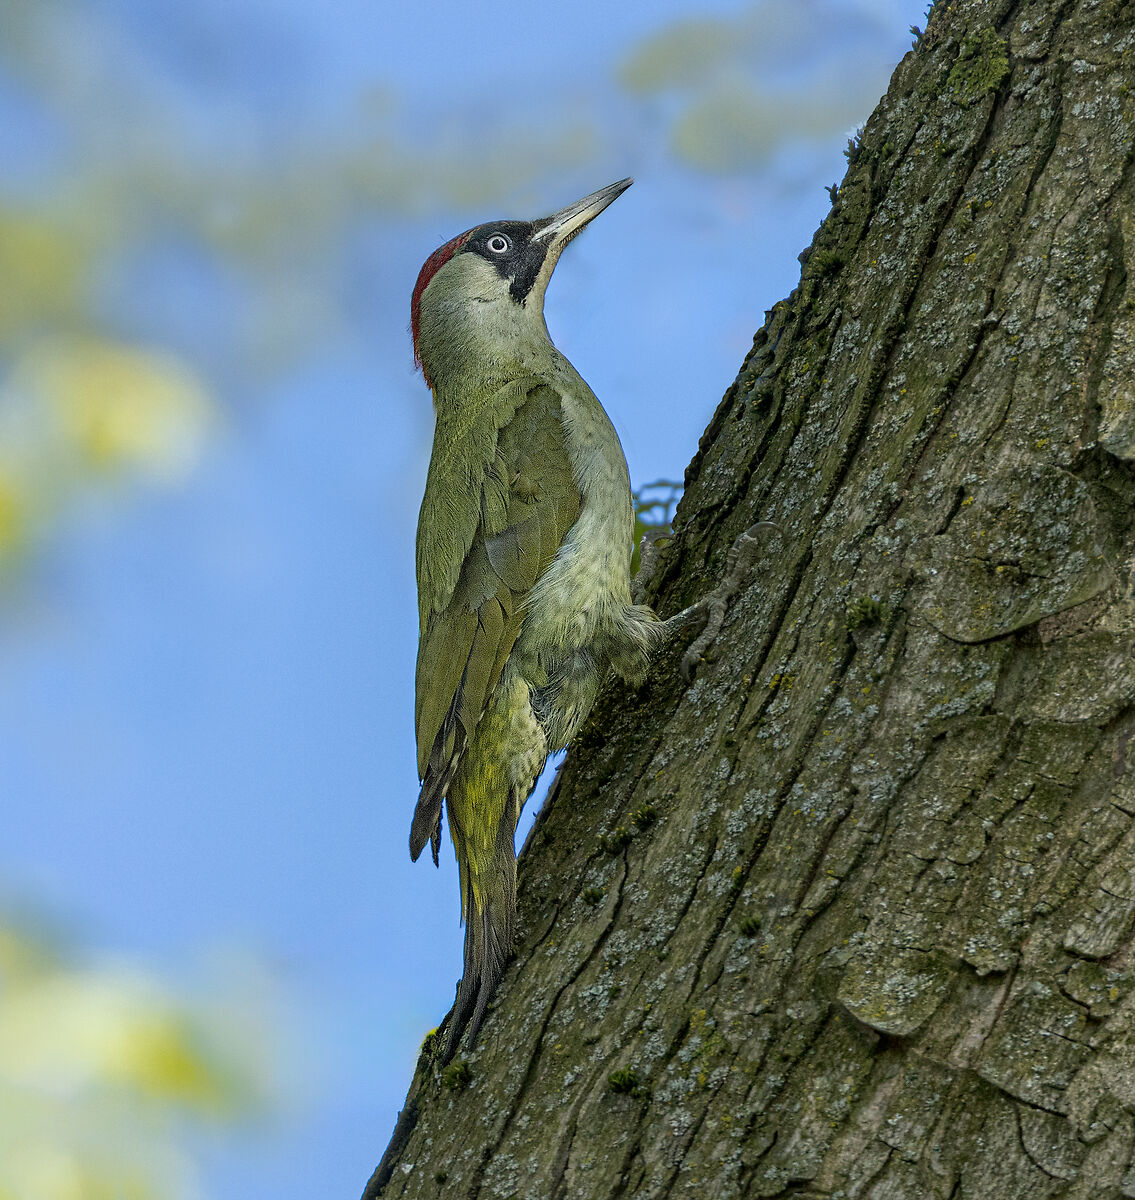 Green woodpecker waiting to enter the nest...